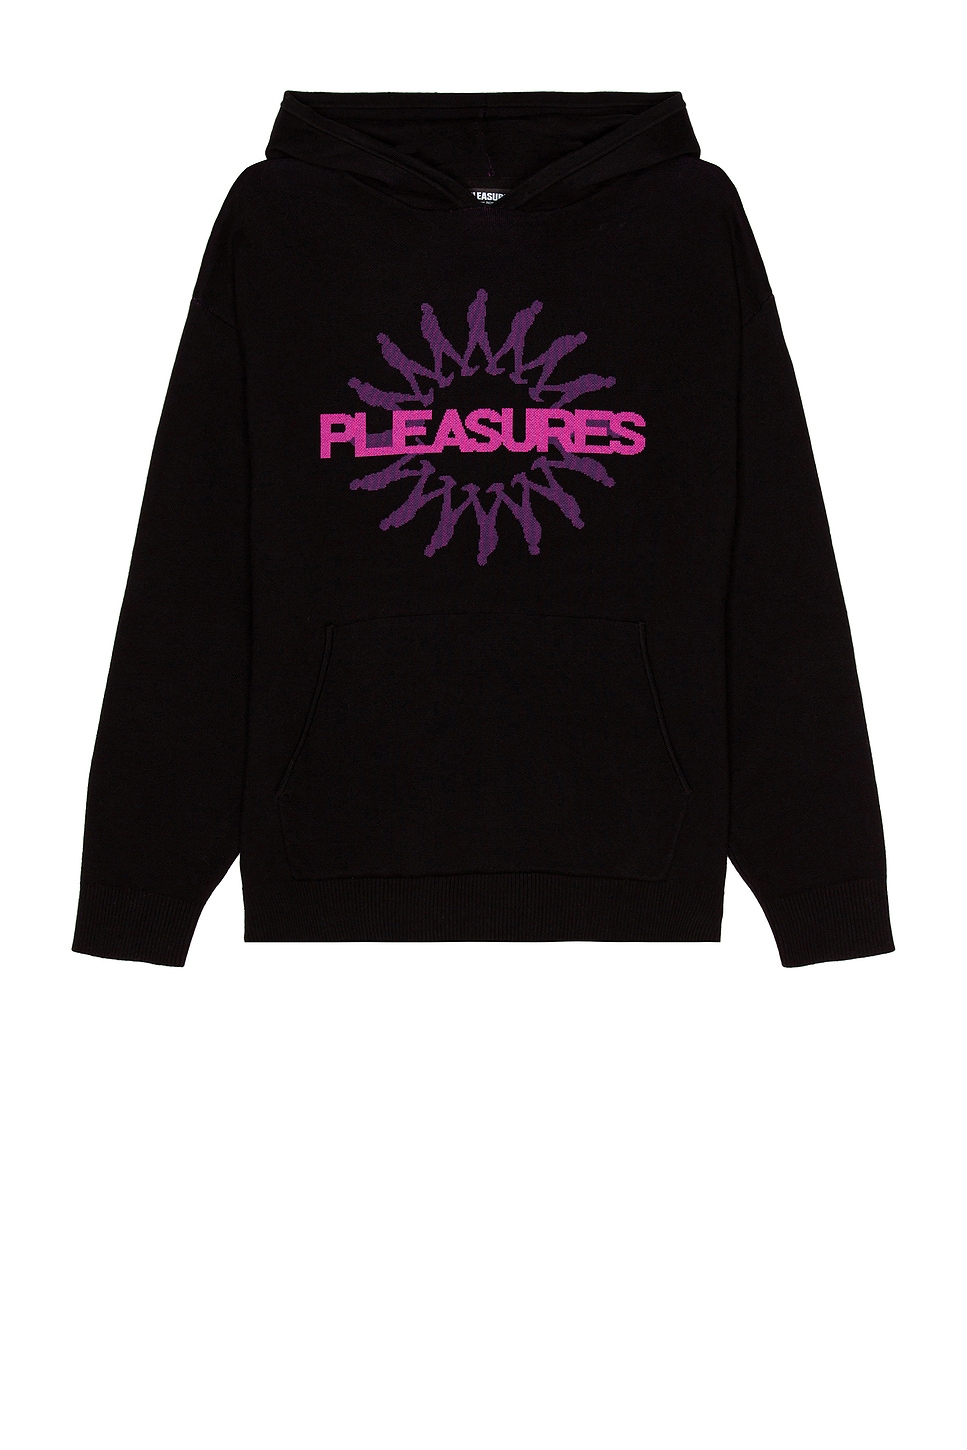 Image 1 of Pleasures Passion Knit Sweater Hoodie in Black